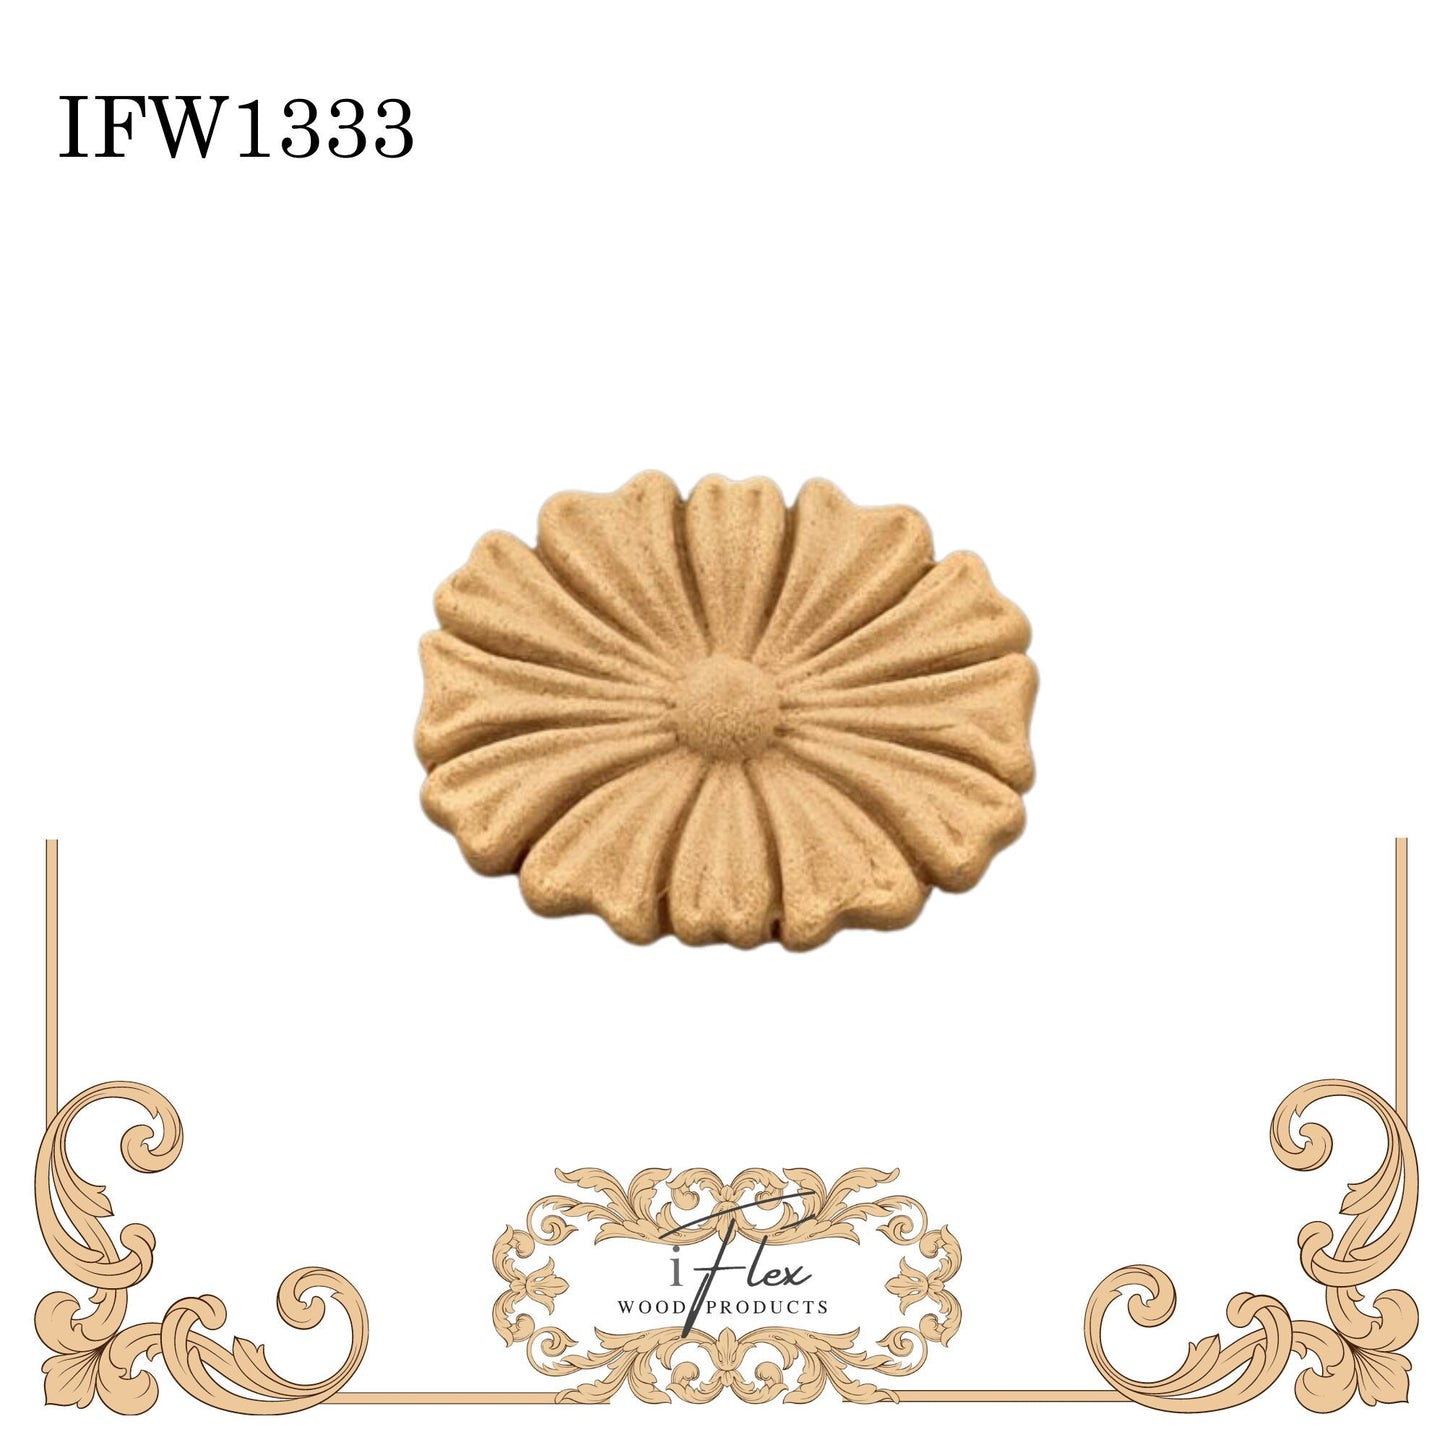 IFW 1333 iFlex Wood Products, bendable mouldings, flexible, wooden appliques, flower